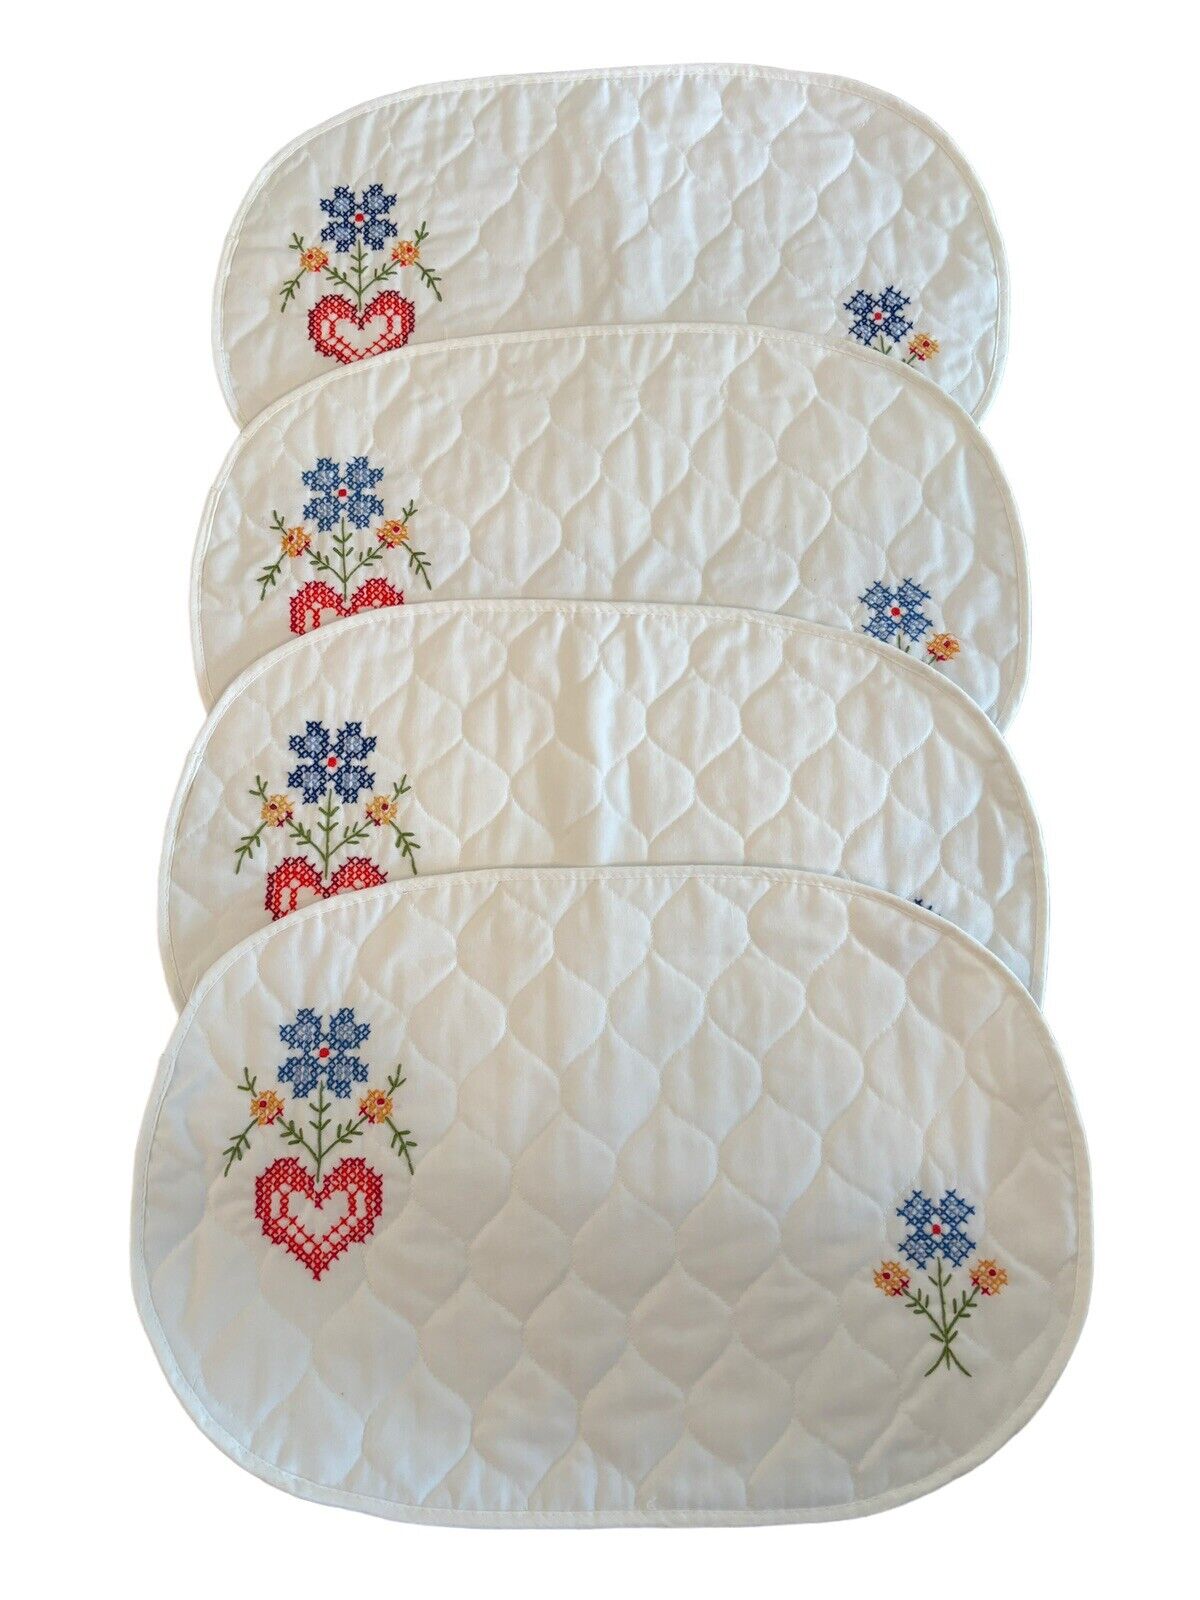 4 Vintage Grannycore Heart Themed Quilted Embroidered White Red Oval Placemats